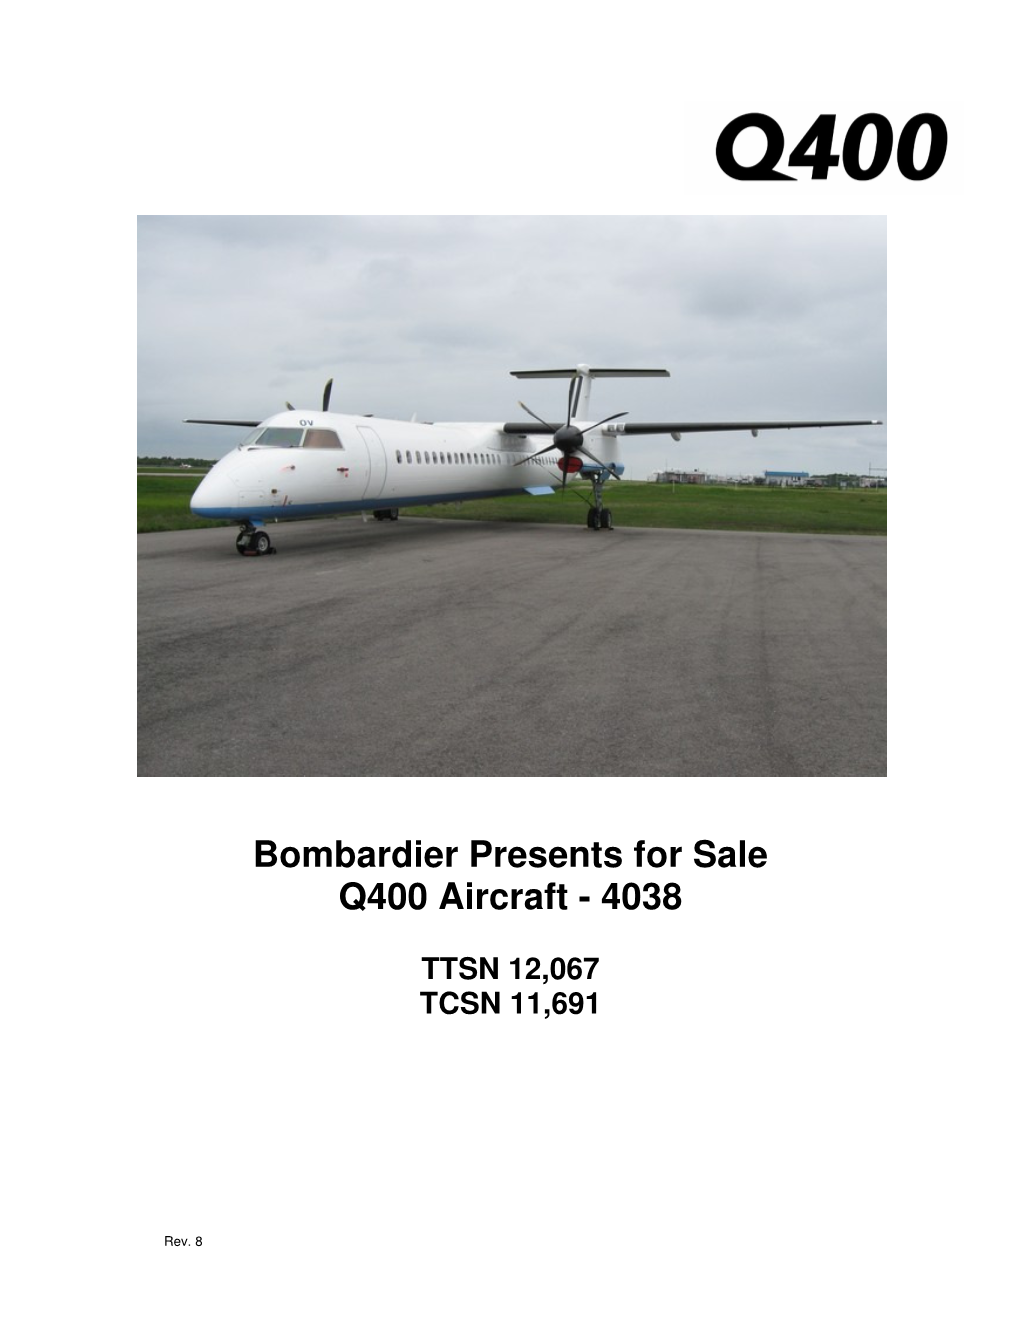 Bombardier Presents for Sale Q400 Aircraft - 4038